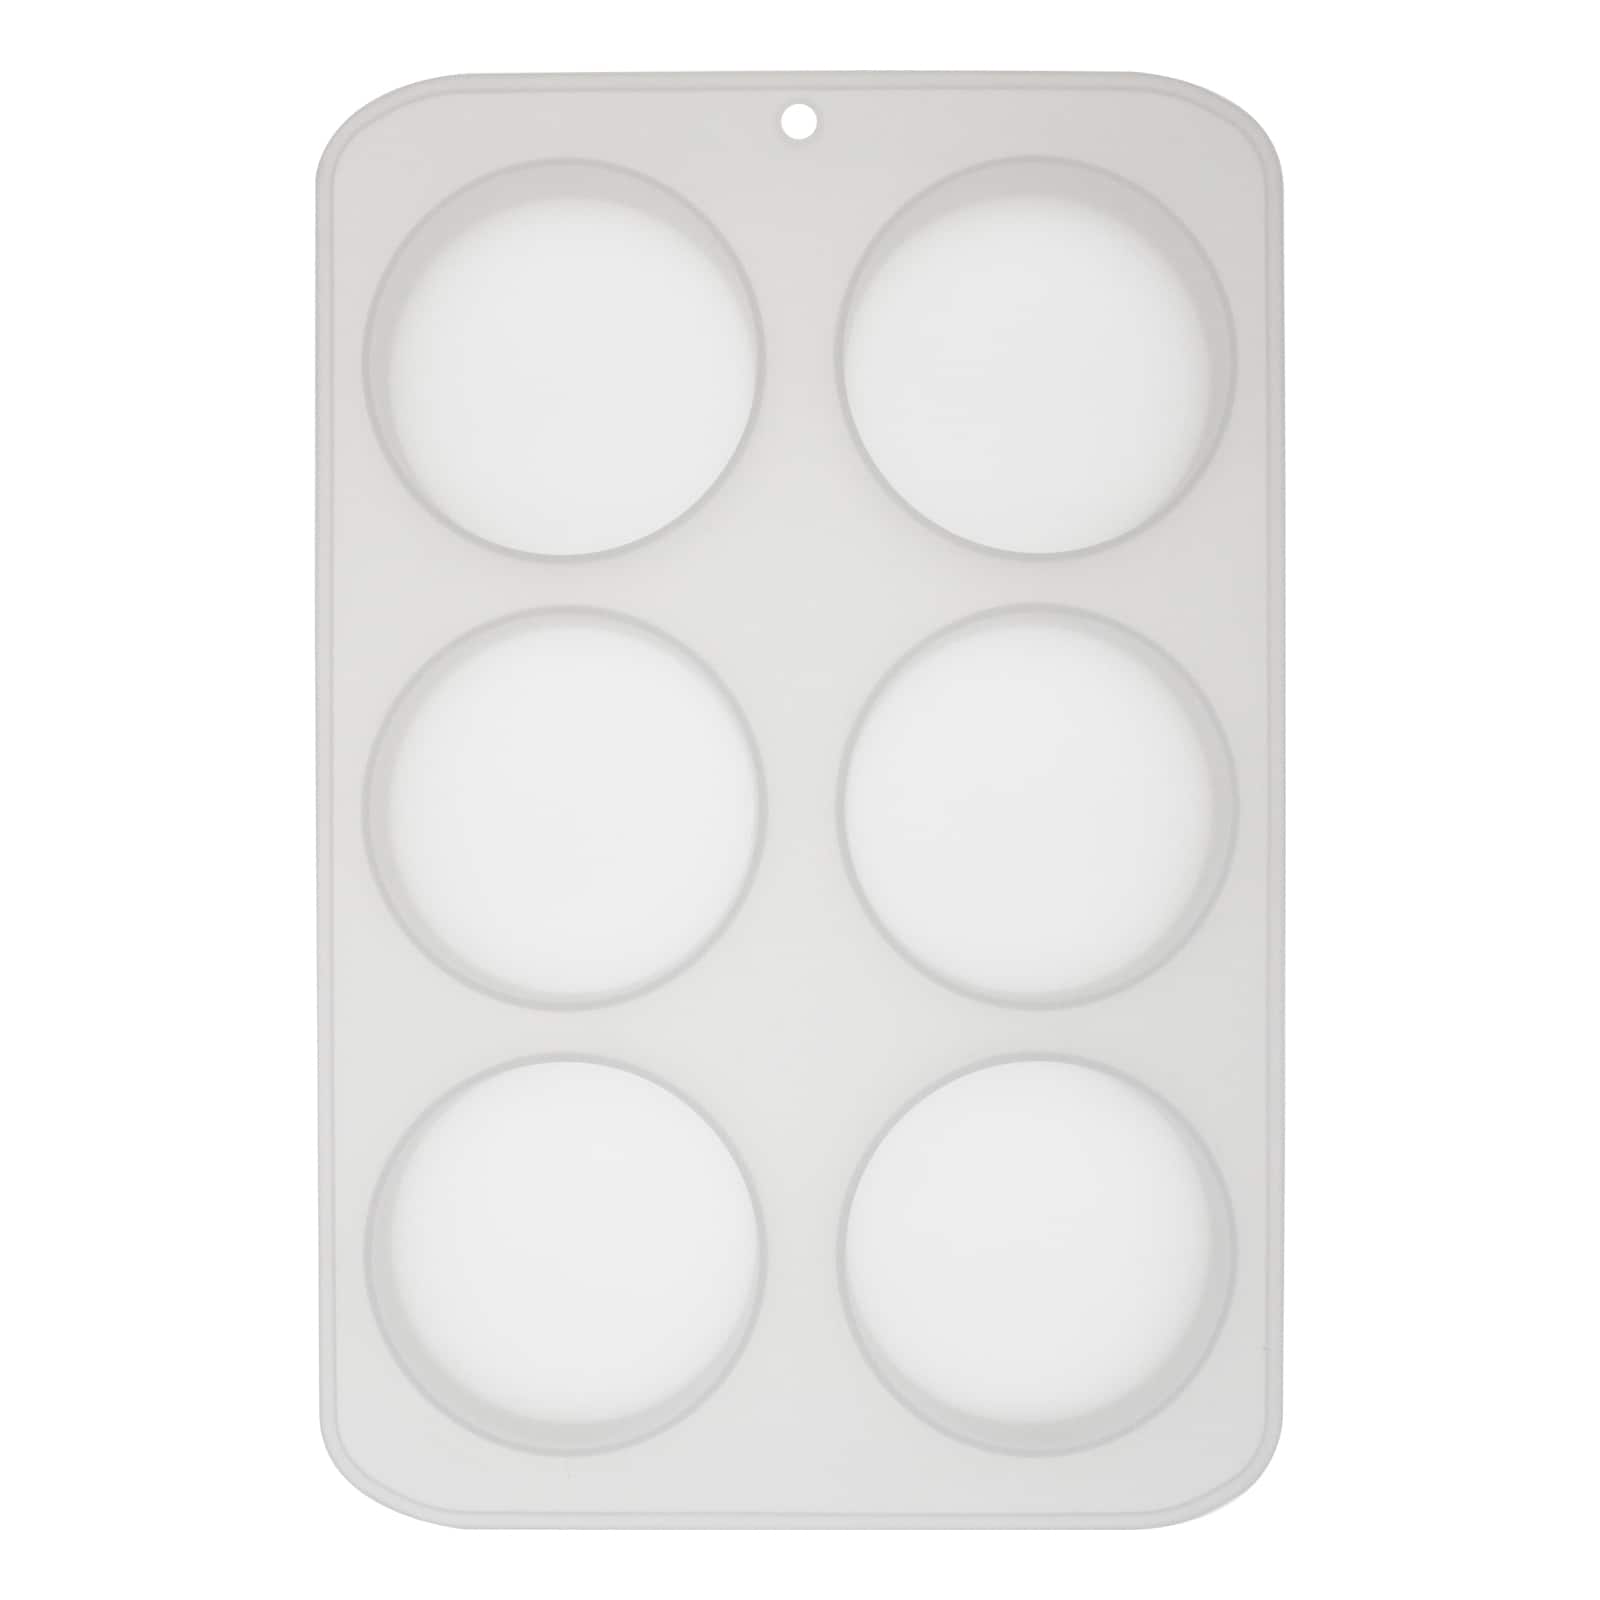 Silicone Round Soap Mold by Make Market®